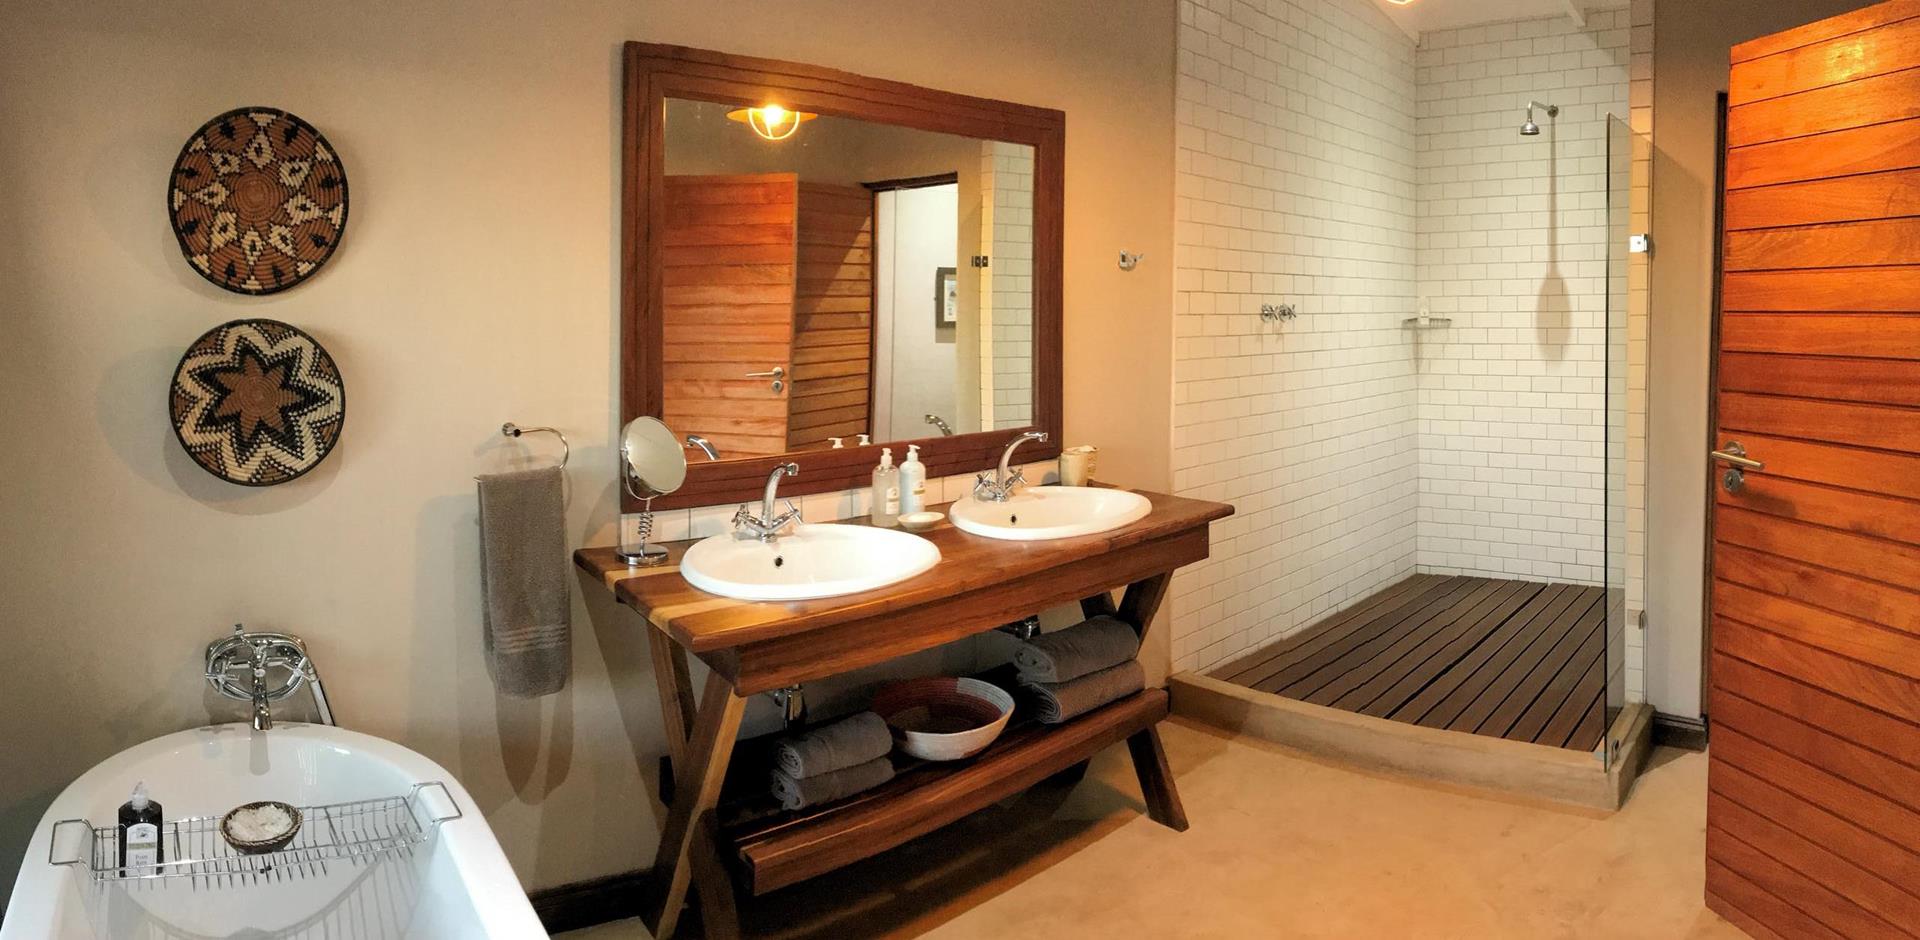 Bathroom, Fugitives' Drift Lodge and Guesthouse, South Africa, A&K